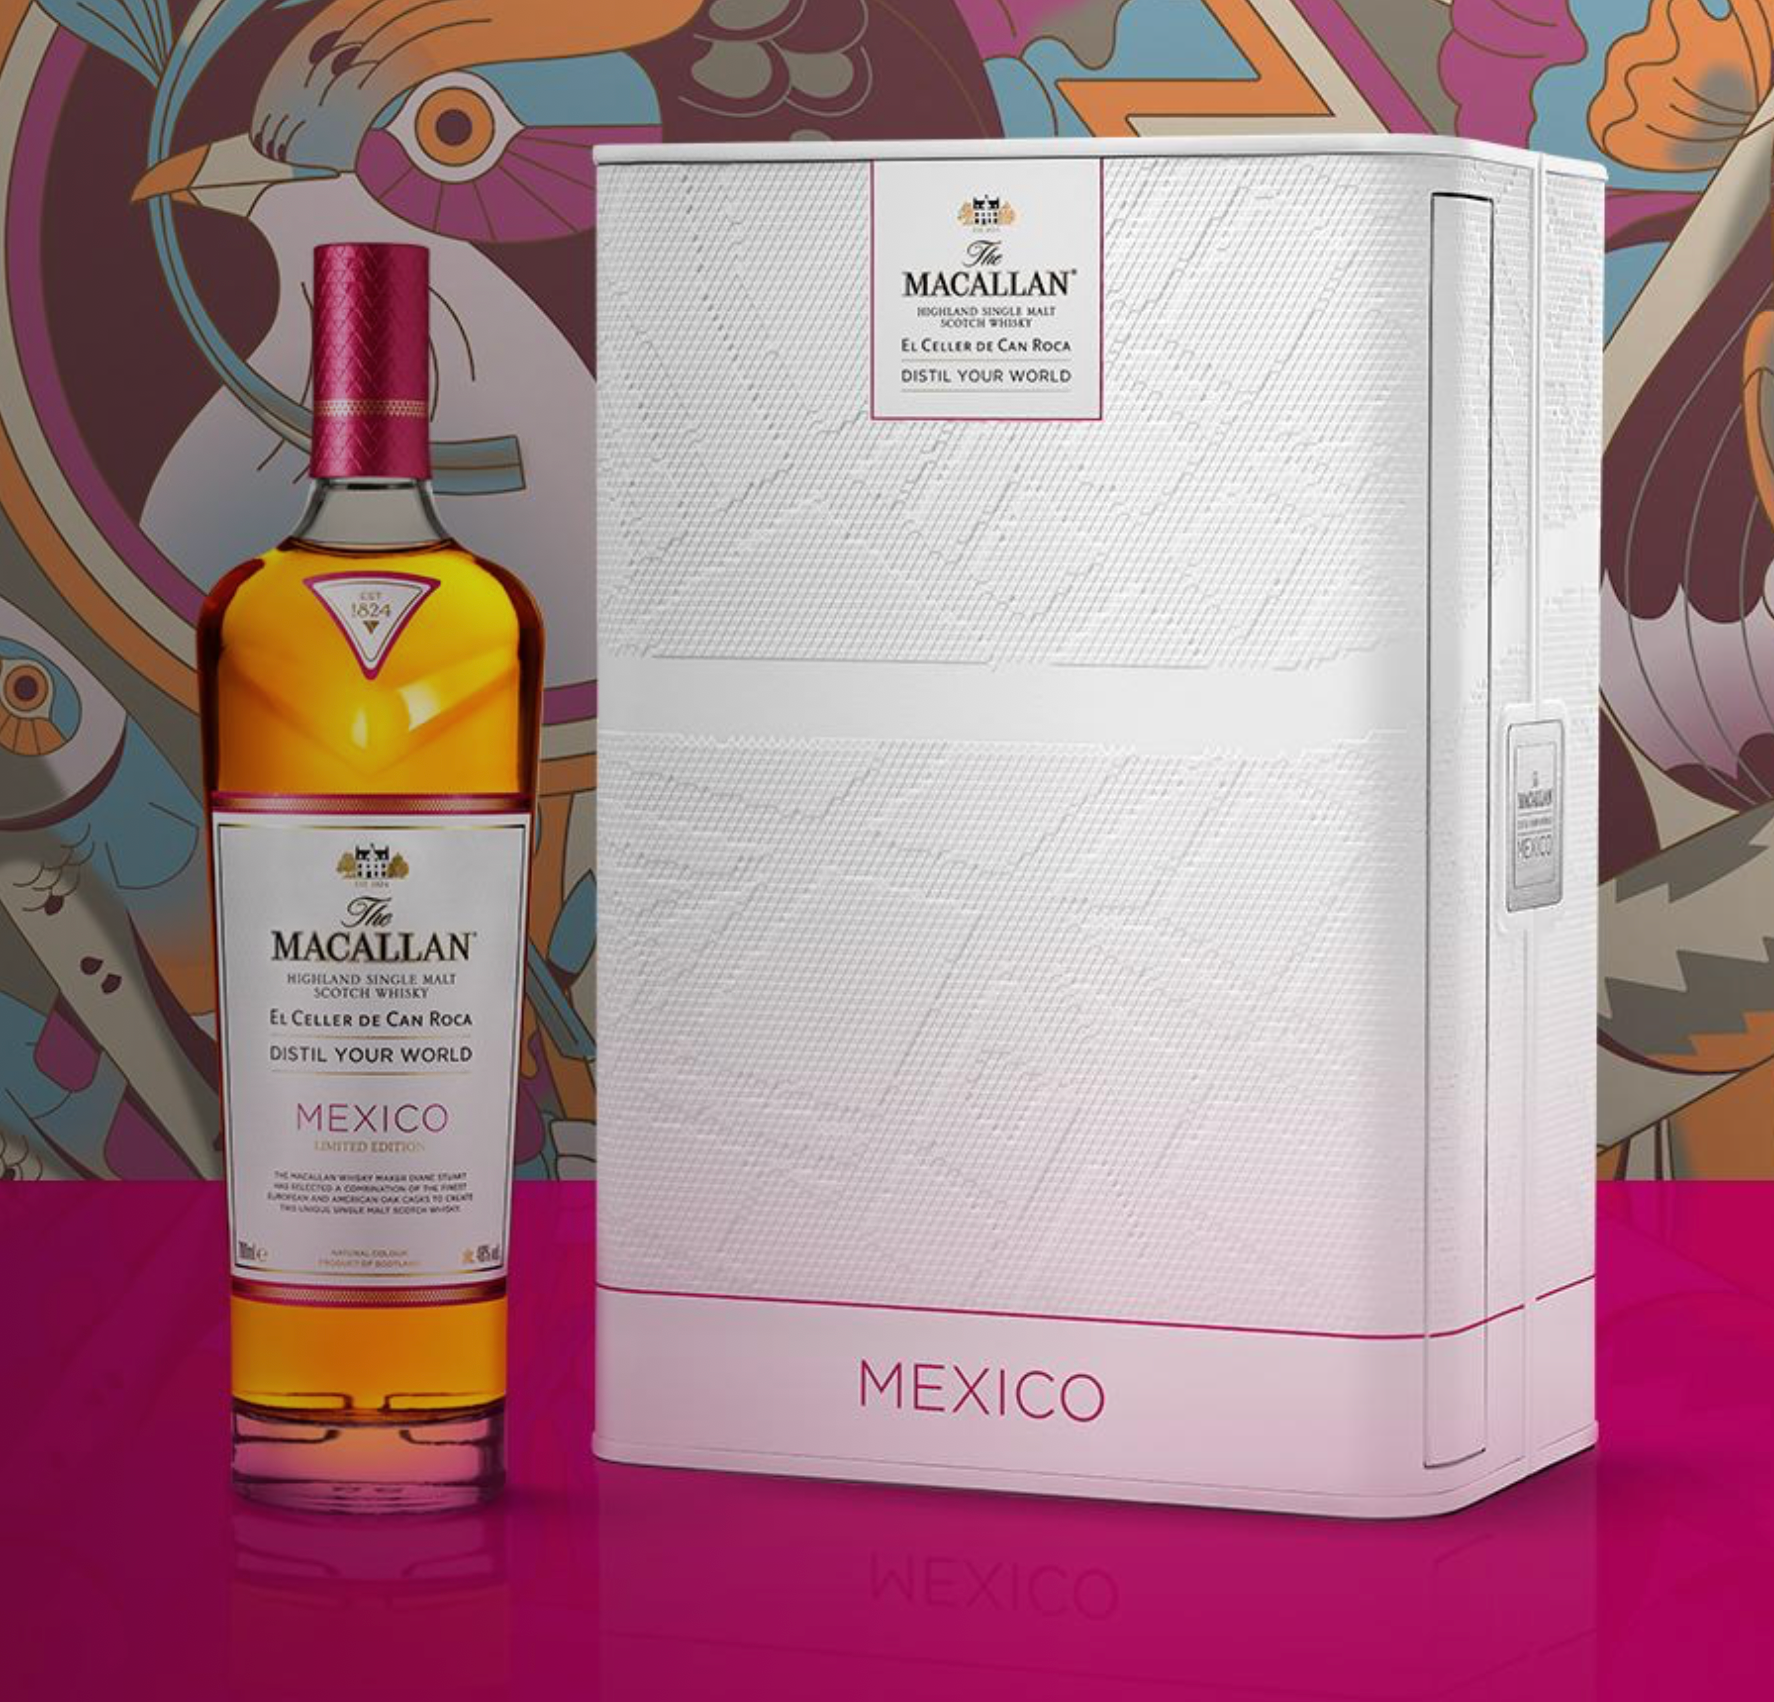 Macallan Mexico Limited Edition El Celler De Can Roca Distil Your World 700mL a clear tall bottle with a white label and purple top next to a big white case